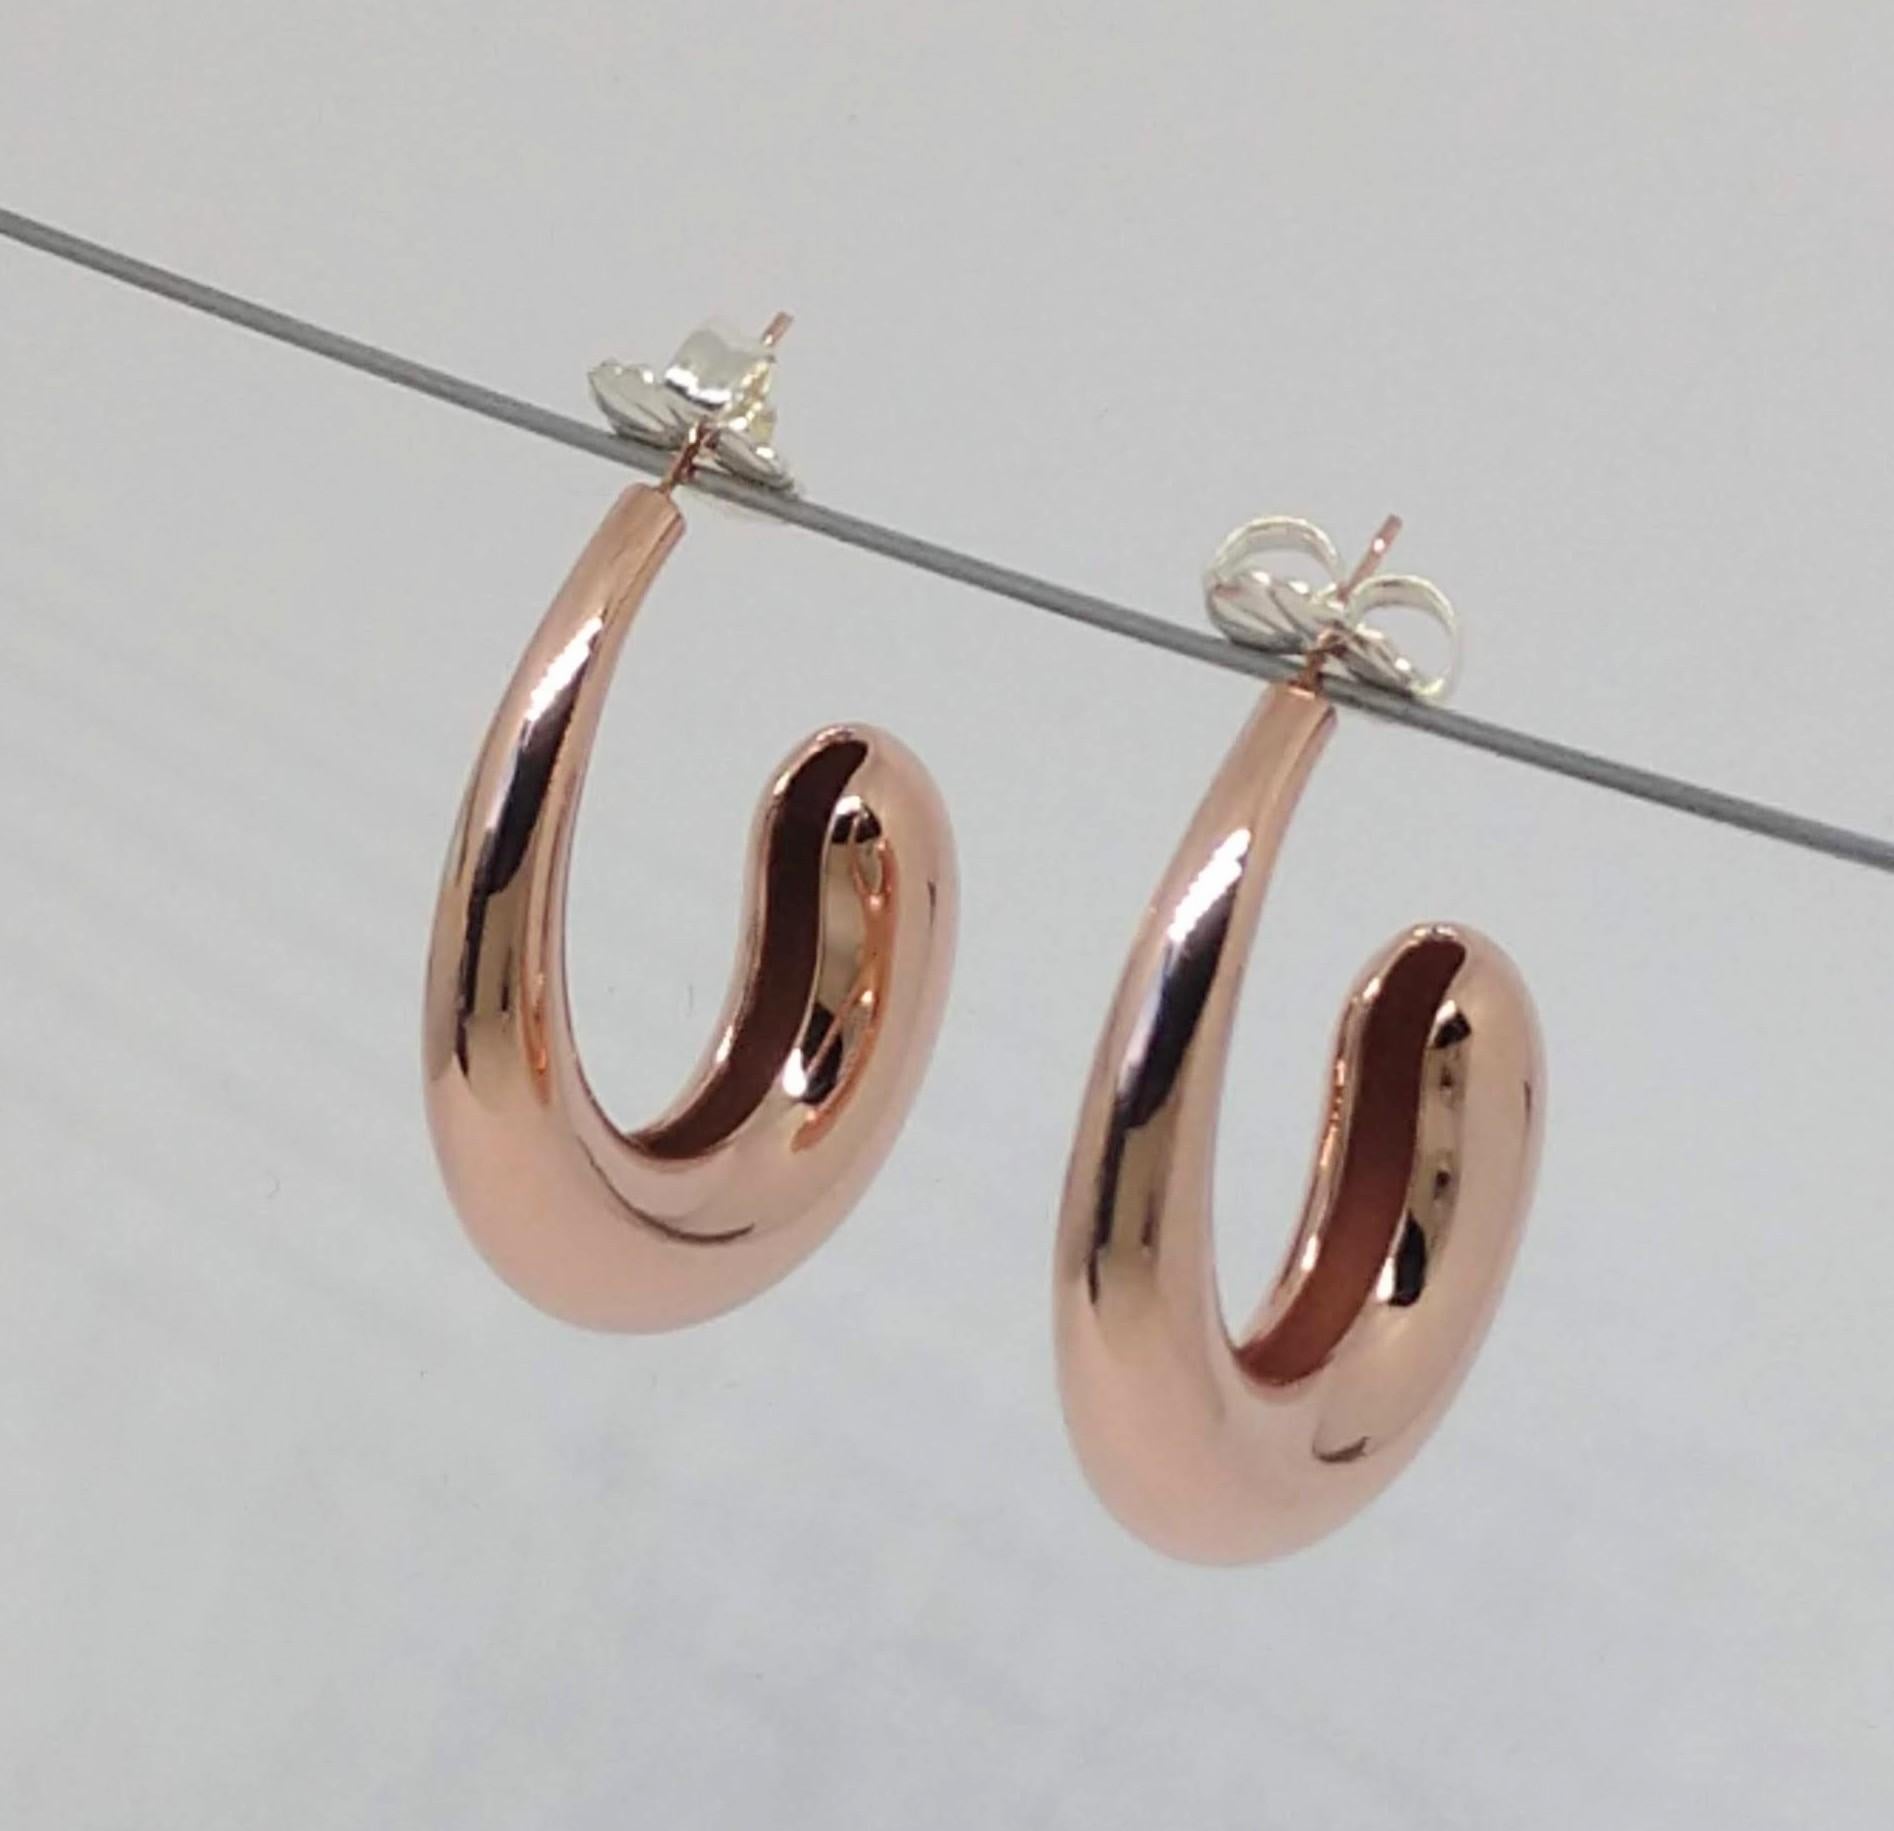 18 Karat Pink Gold Vermeil  C Hoop Teardrop Earrings, Keep it simple silly. KISS. Or less is more. This design can last you 20 years or more. Designing for Tiffanys taught me the essence of the subblime. 
These are hollow hoops 3d printed